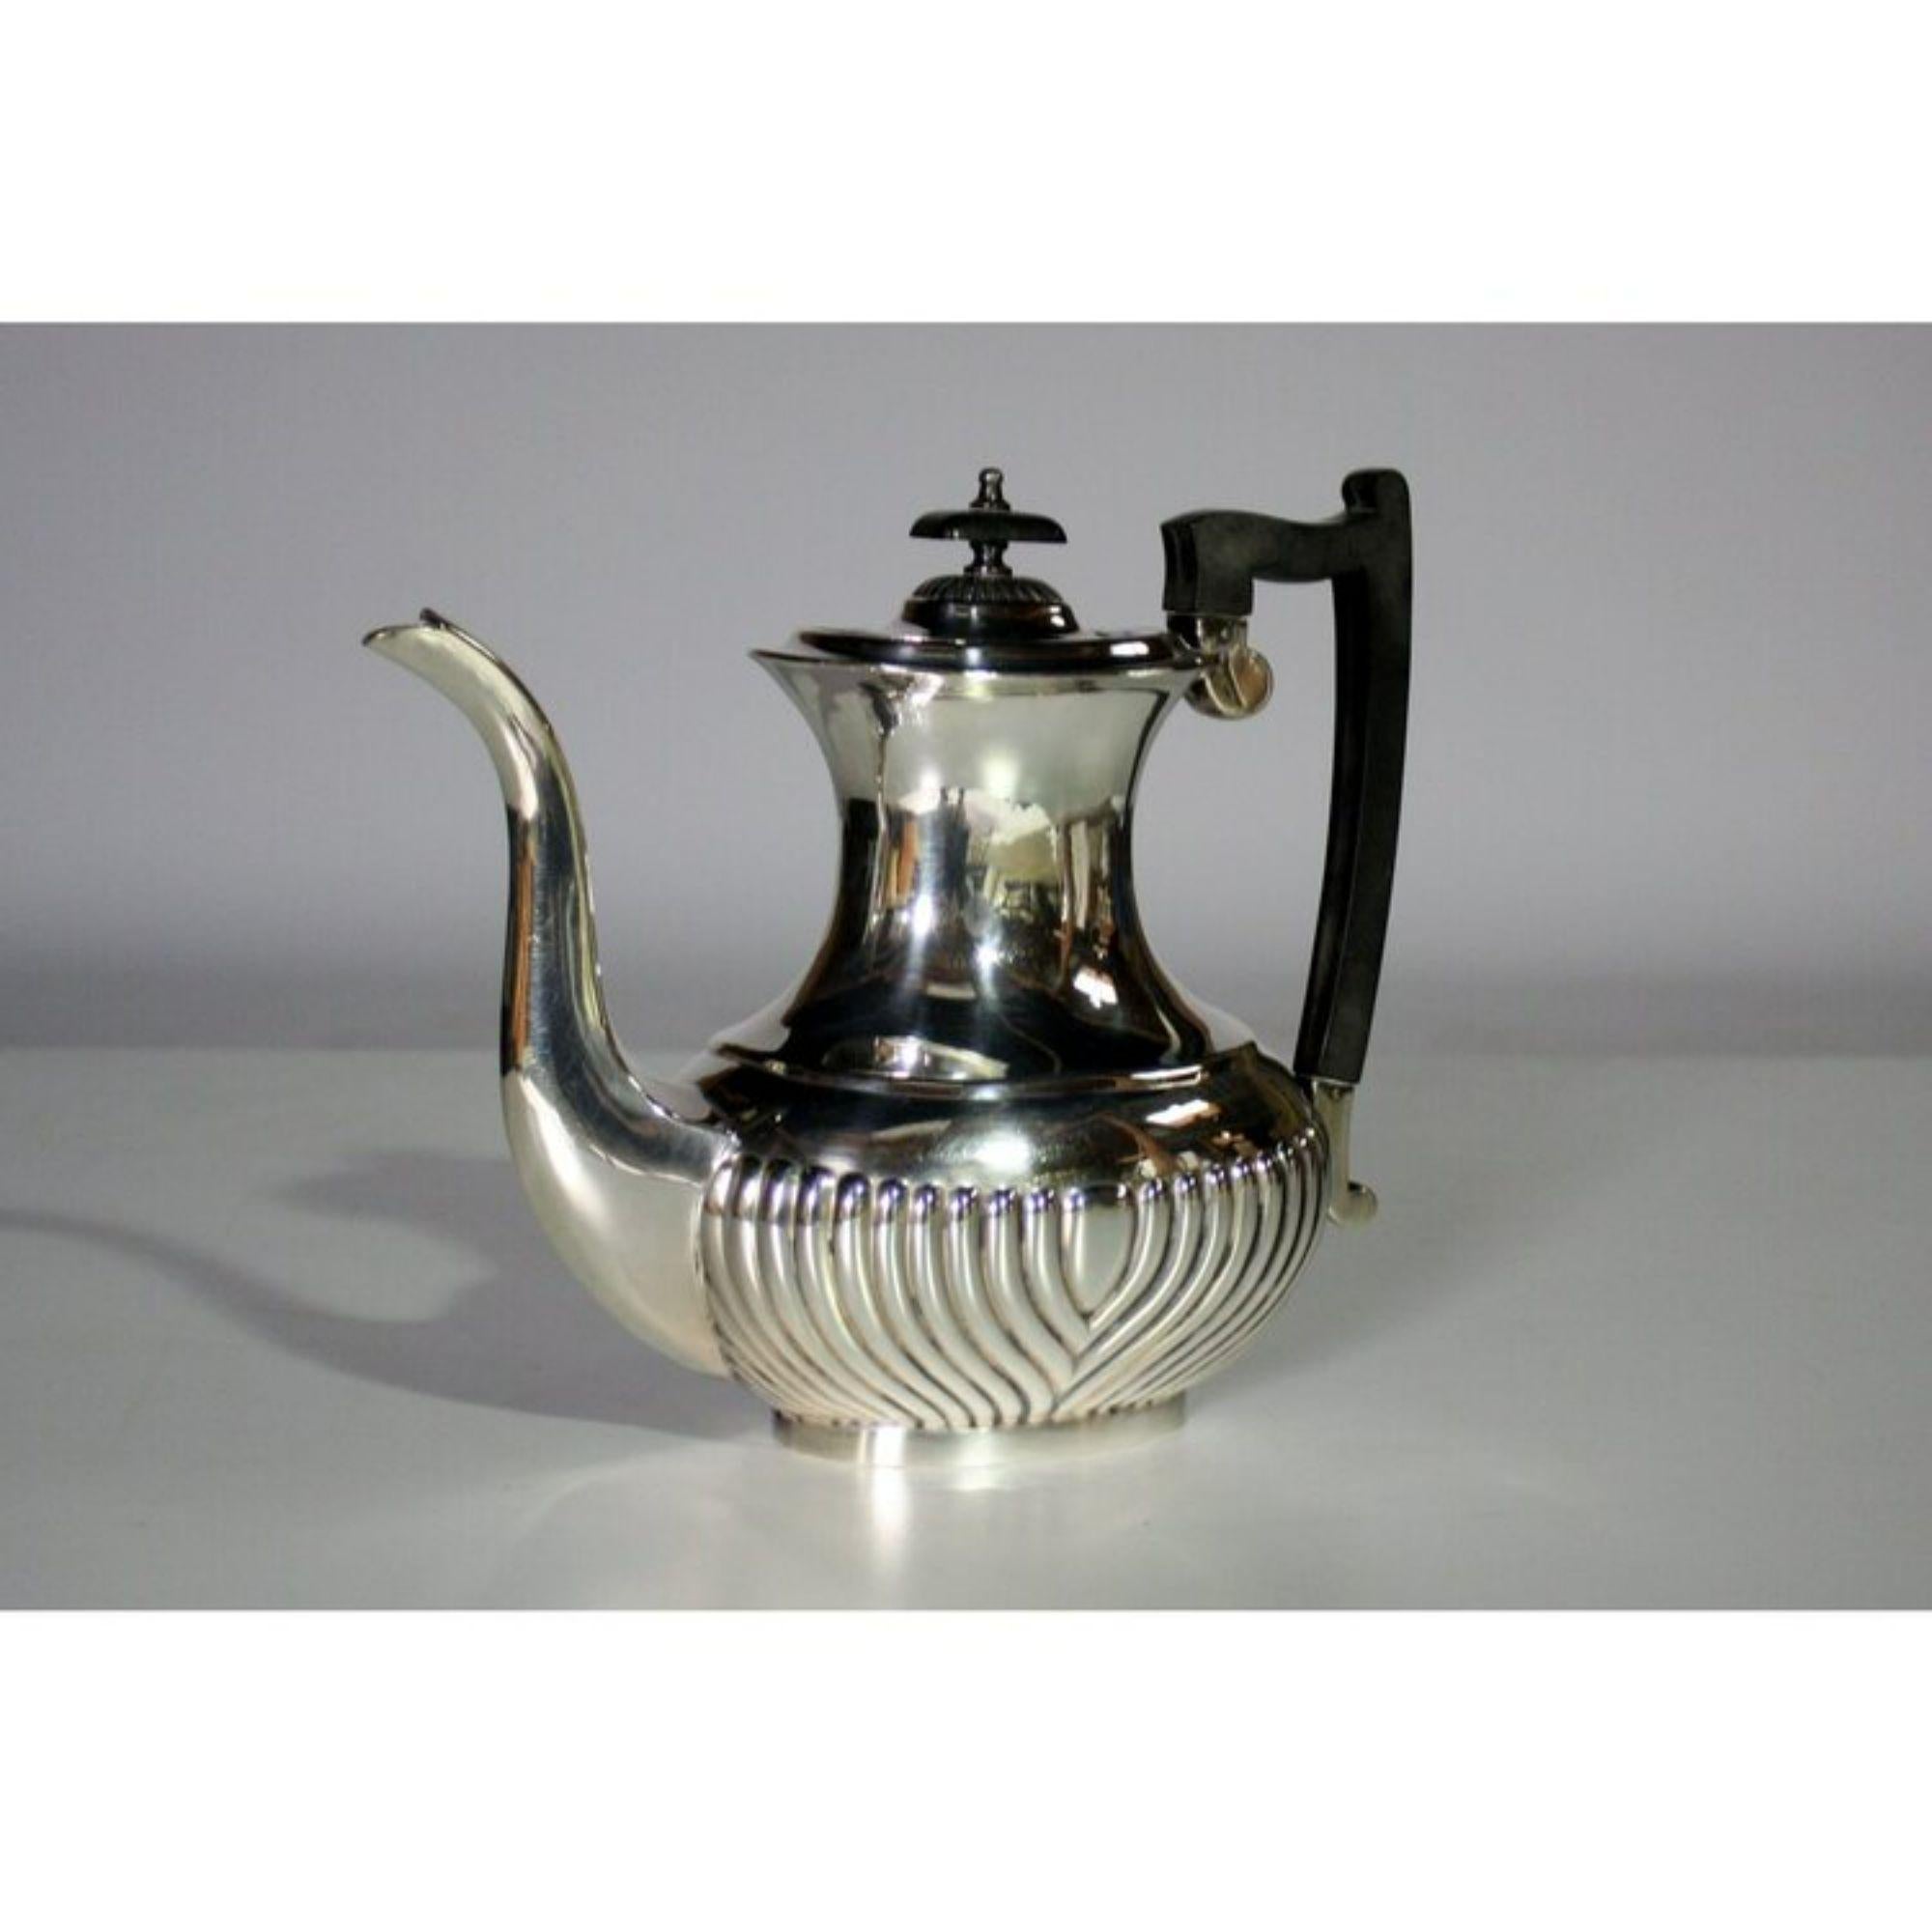 Elegant 5-Piece Queen Anne style silver plated coffee and tea service by Sheffield, England includes Coffee Pot (3